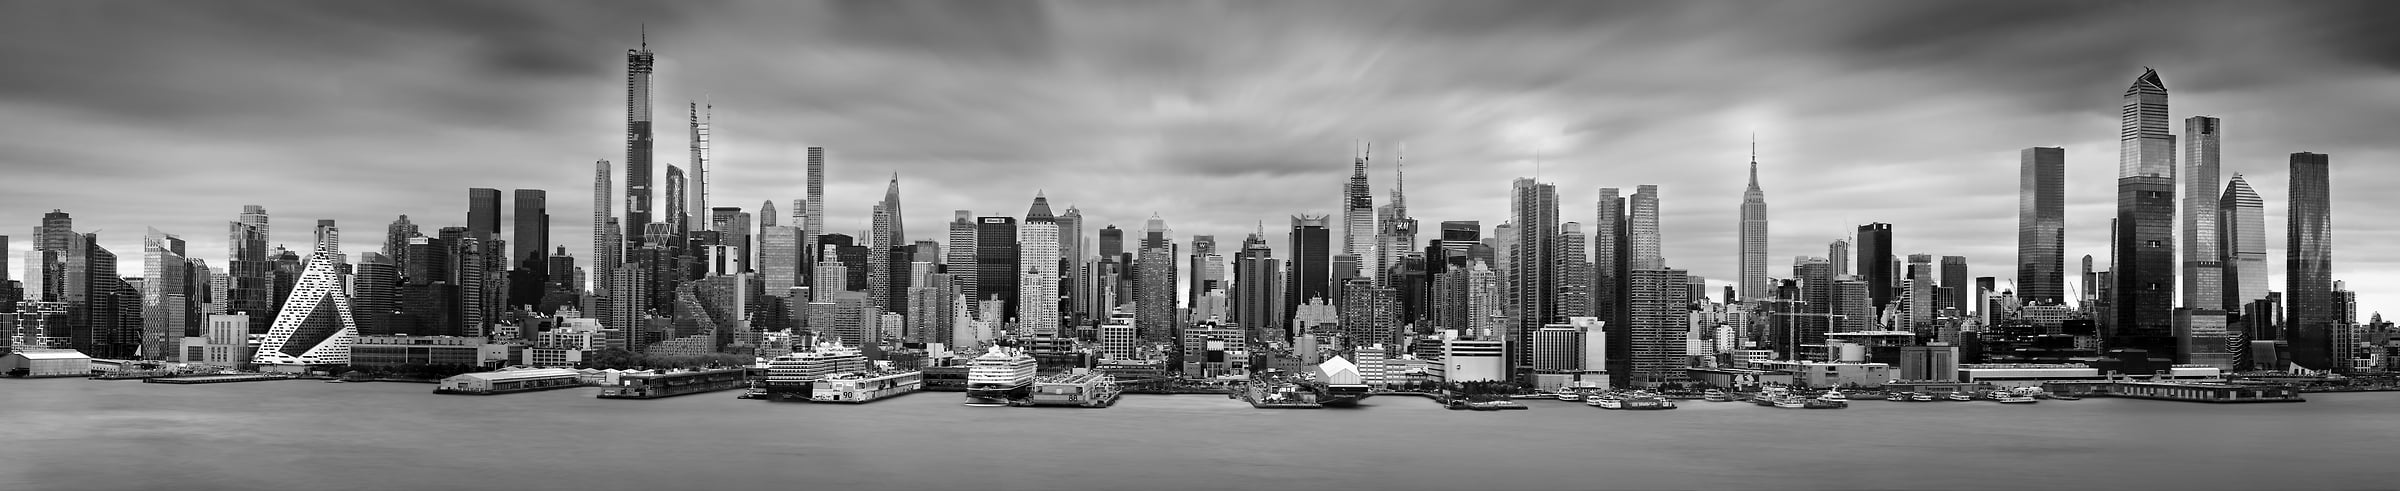 988 megapixels! A very high resolution, big VAST photo print of the New York skyline; black & white photograph created by Phil Crawshay in Weehawken, New Jersey